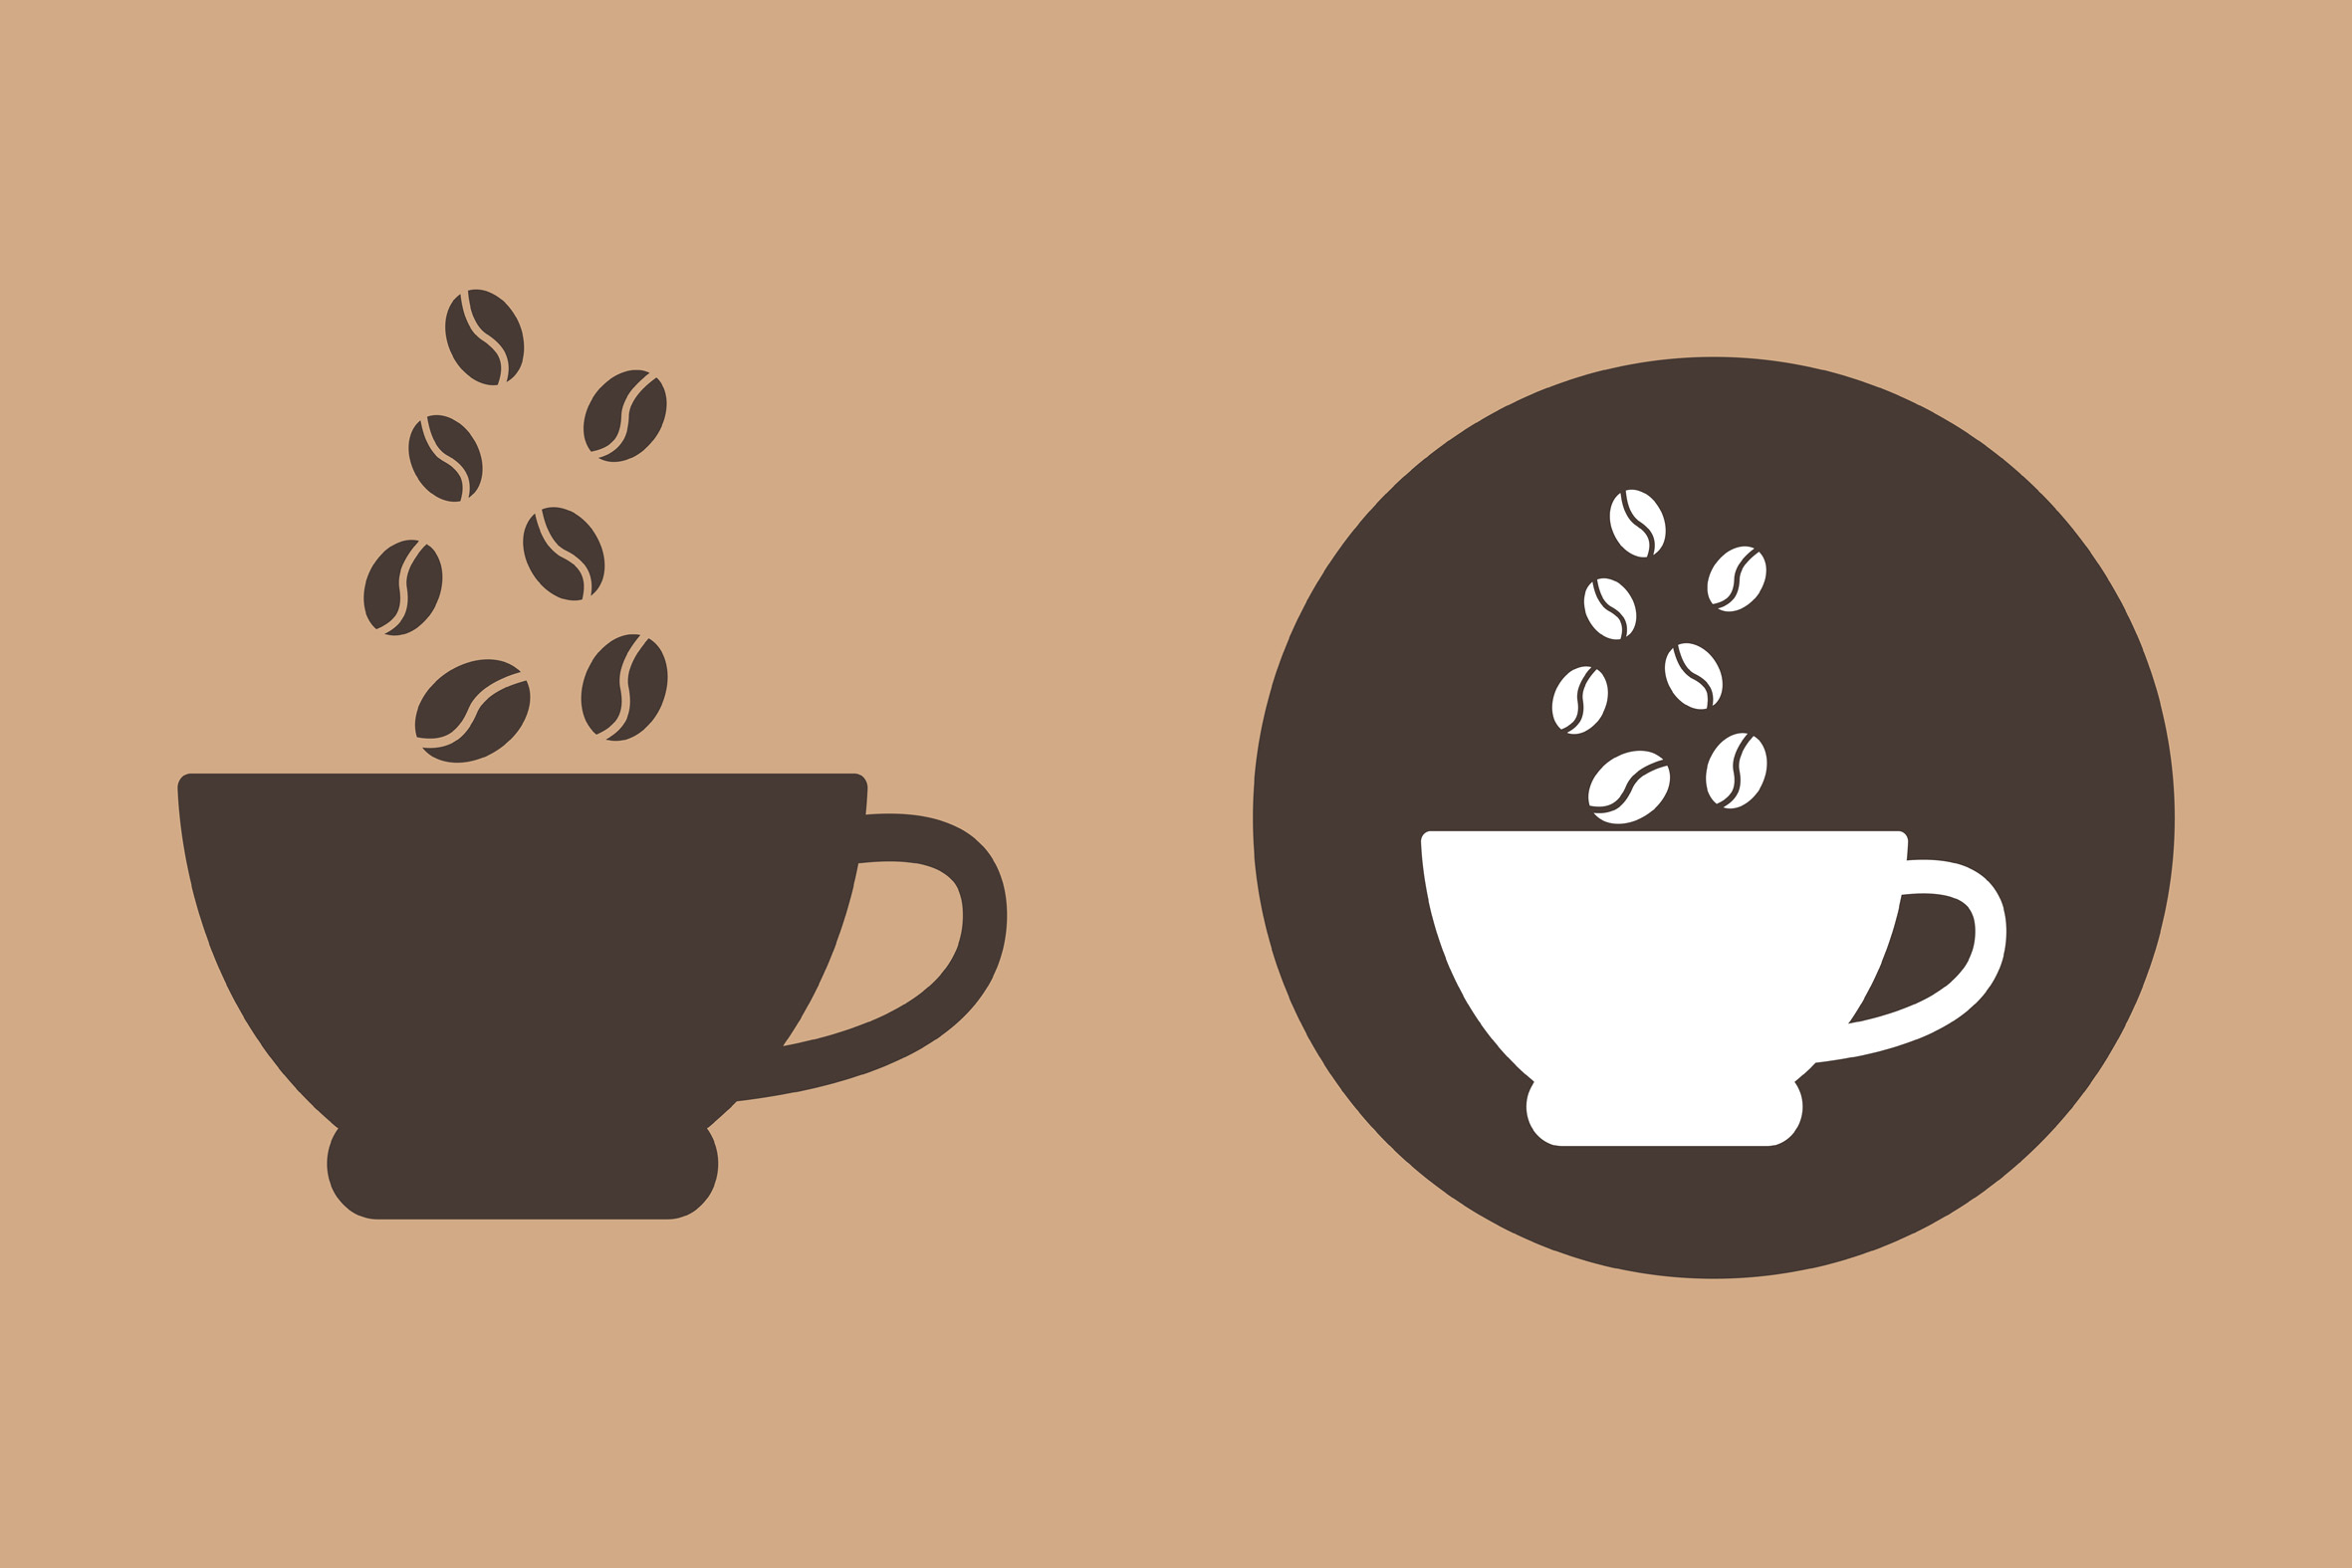 https://static.vecteezy.com/system/resources/previews/001/631/092/original/coffee-beans-coffee-cup-object-free-vector.jpg